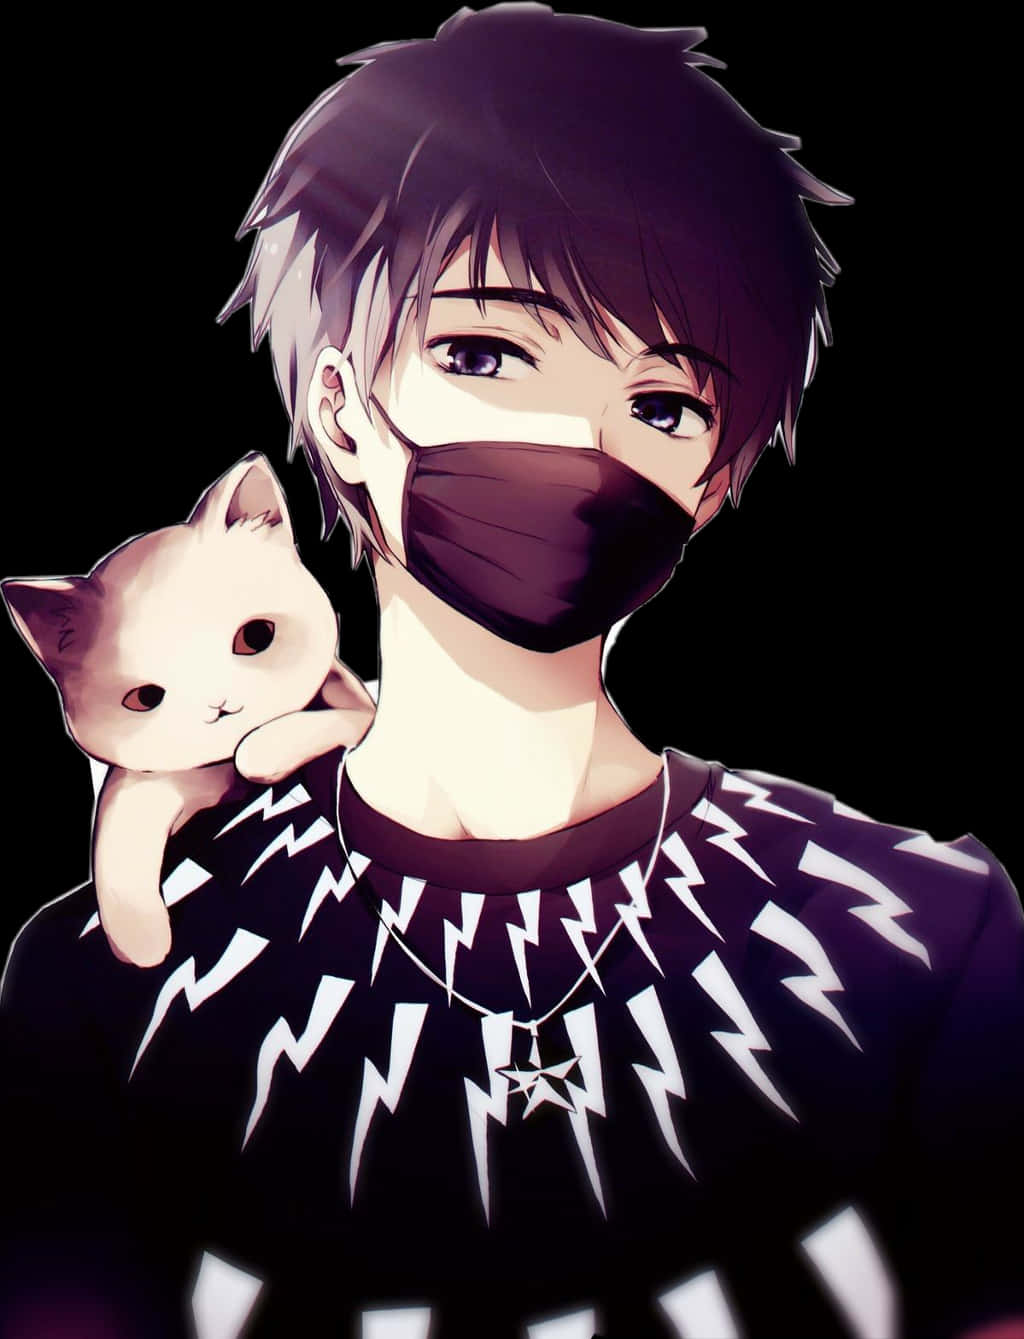 Download Anime Boy With Mask Png Wallpaper | Wallpapers.Com